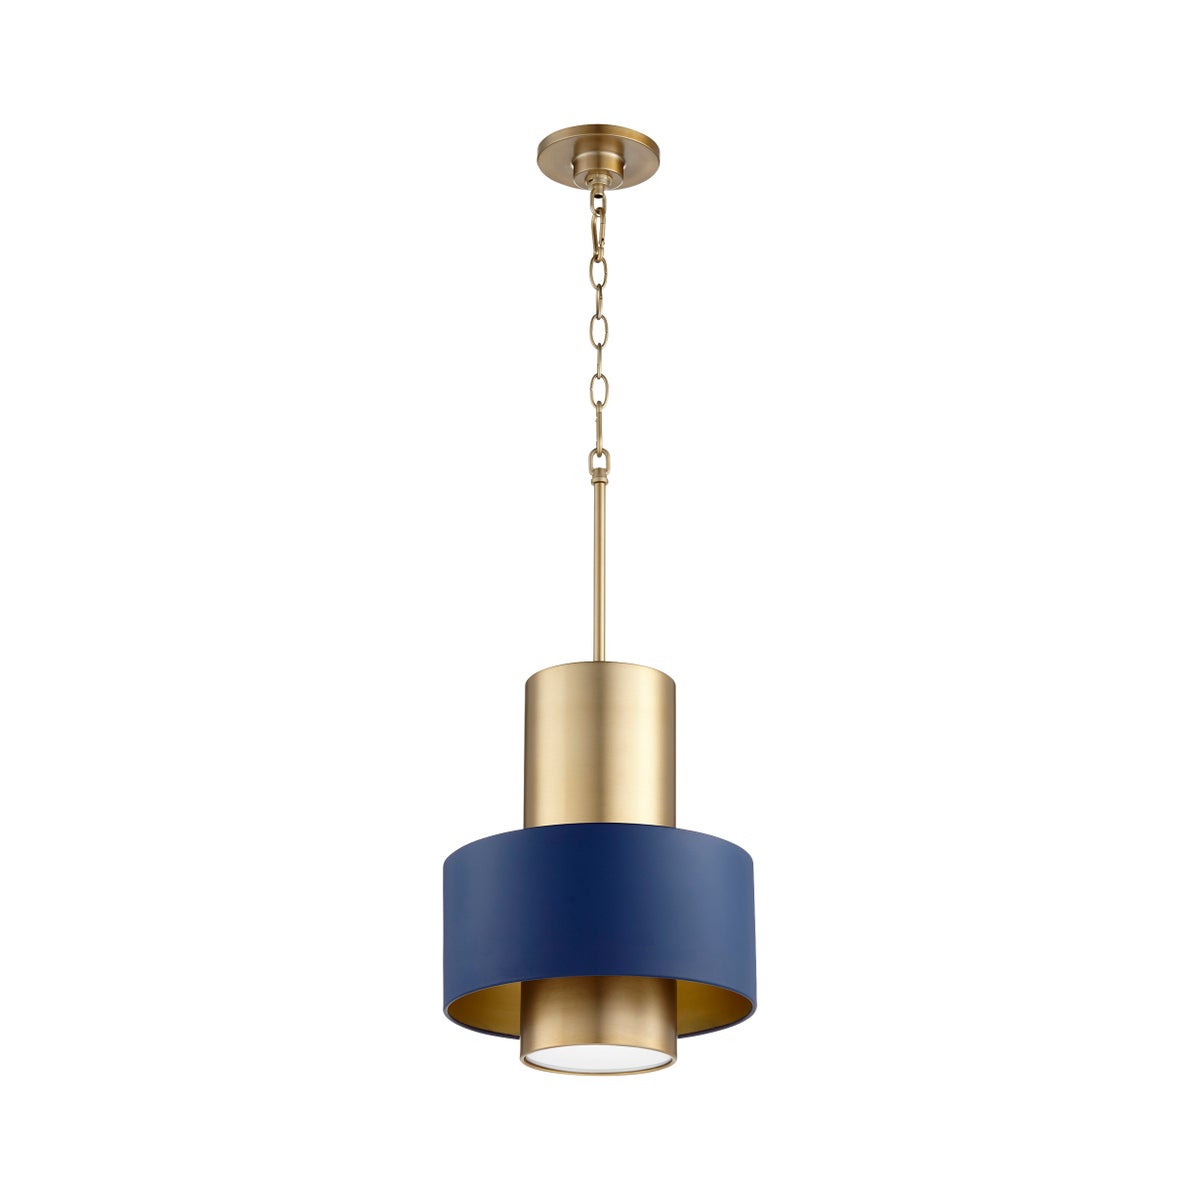 Two-Toned Blue/Aged Brass Cylinder Drum Pendant